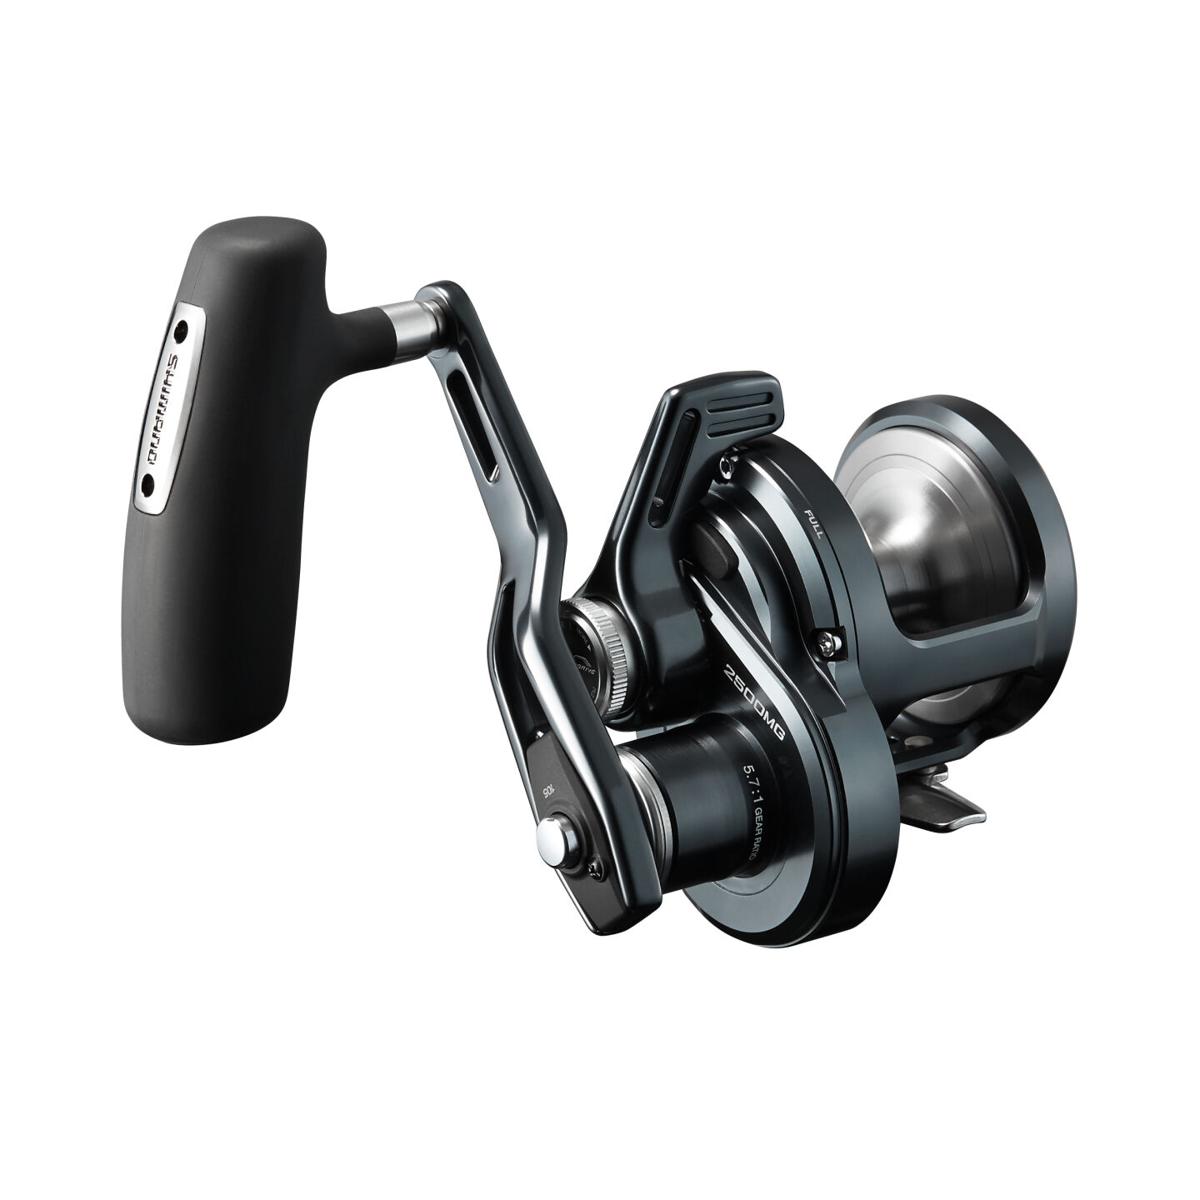 Shimano Introduces Reel Addition to Level Ocea Jigger Line